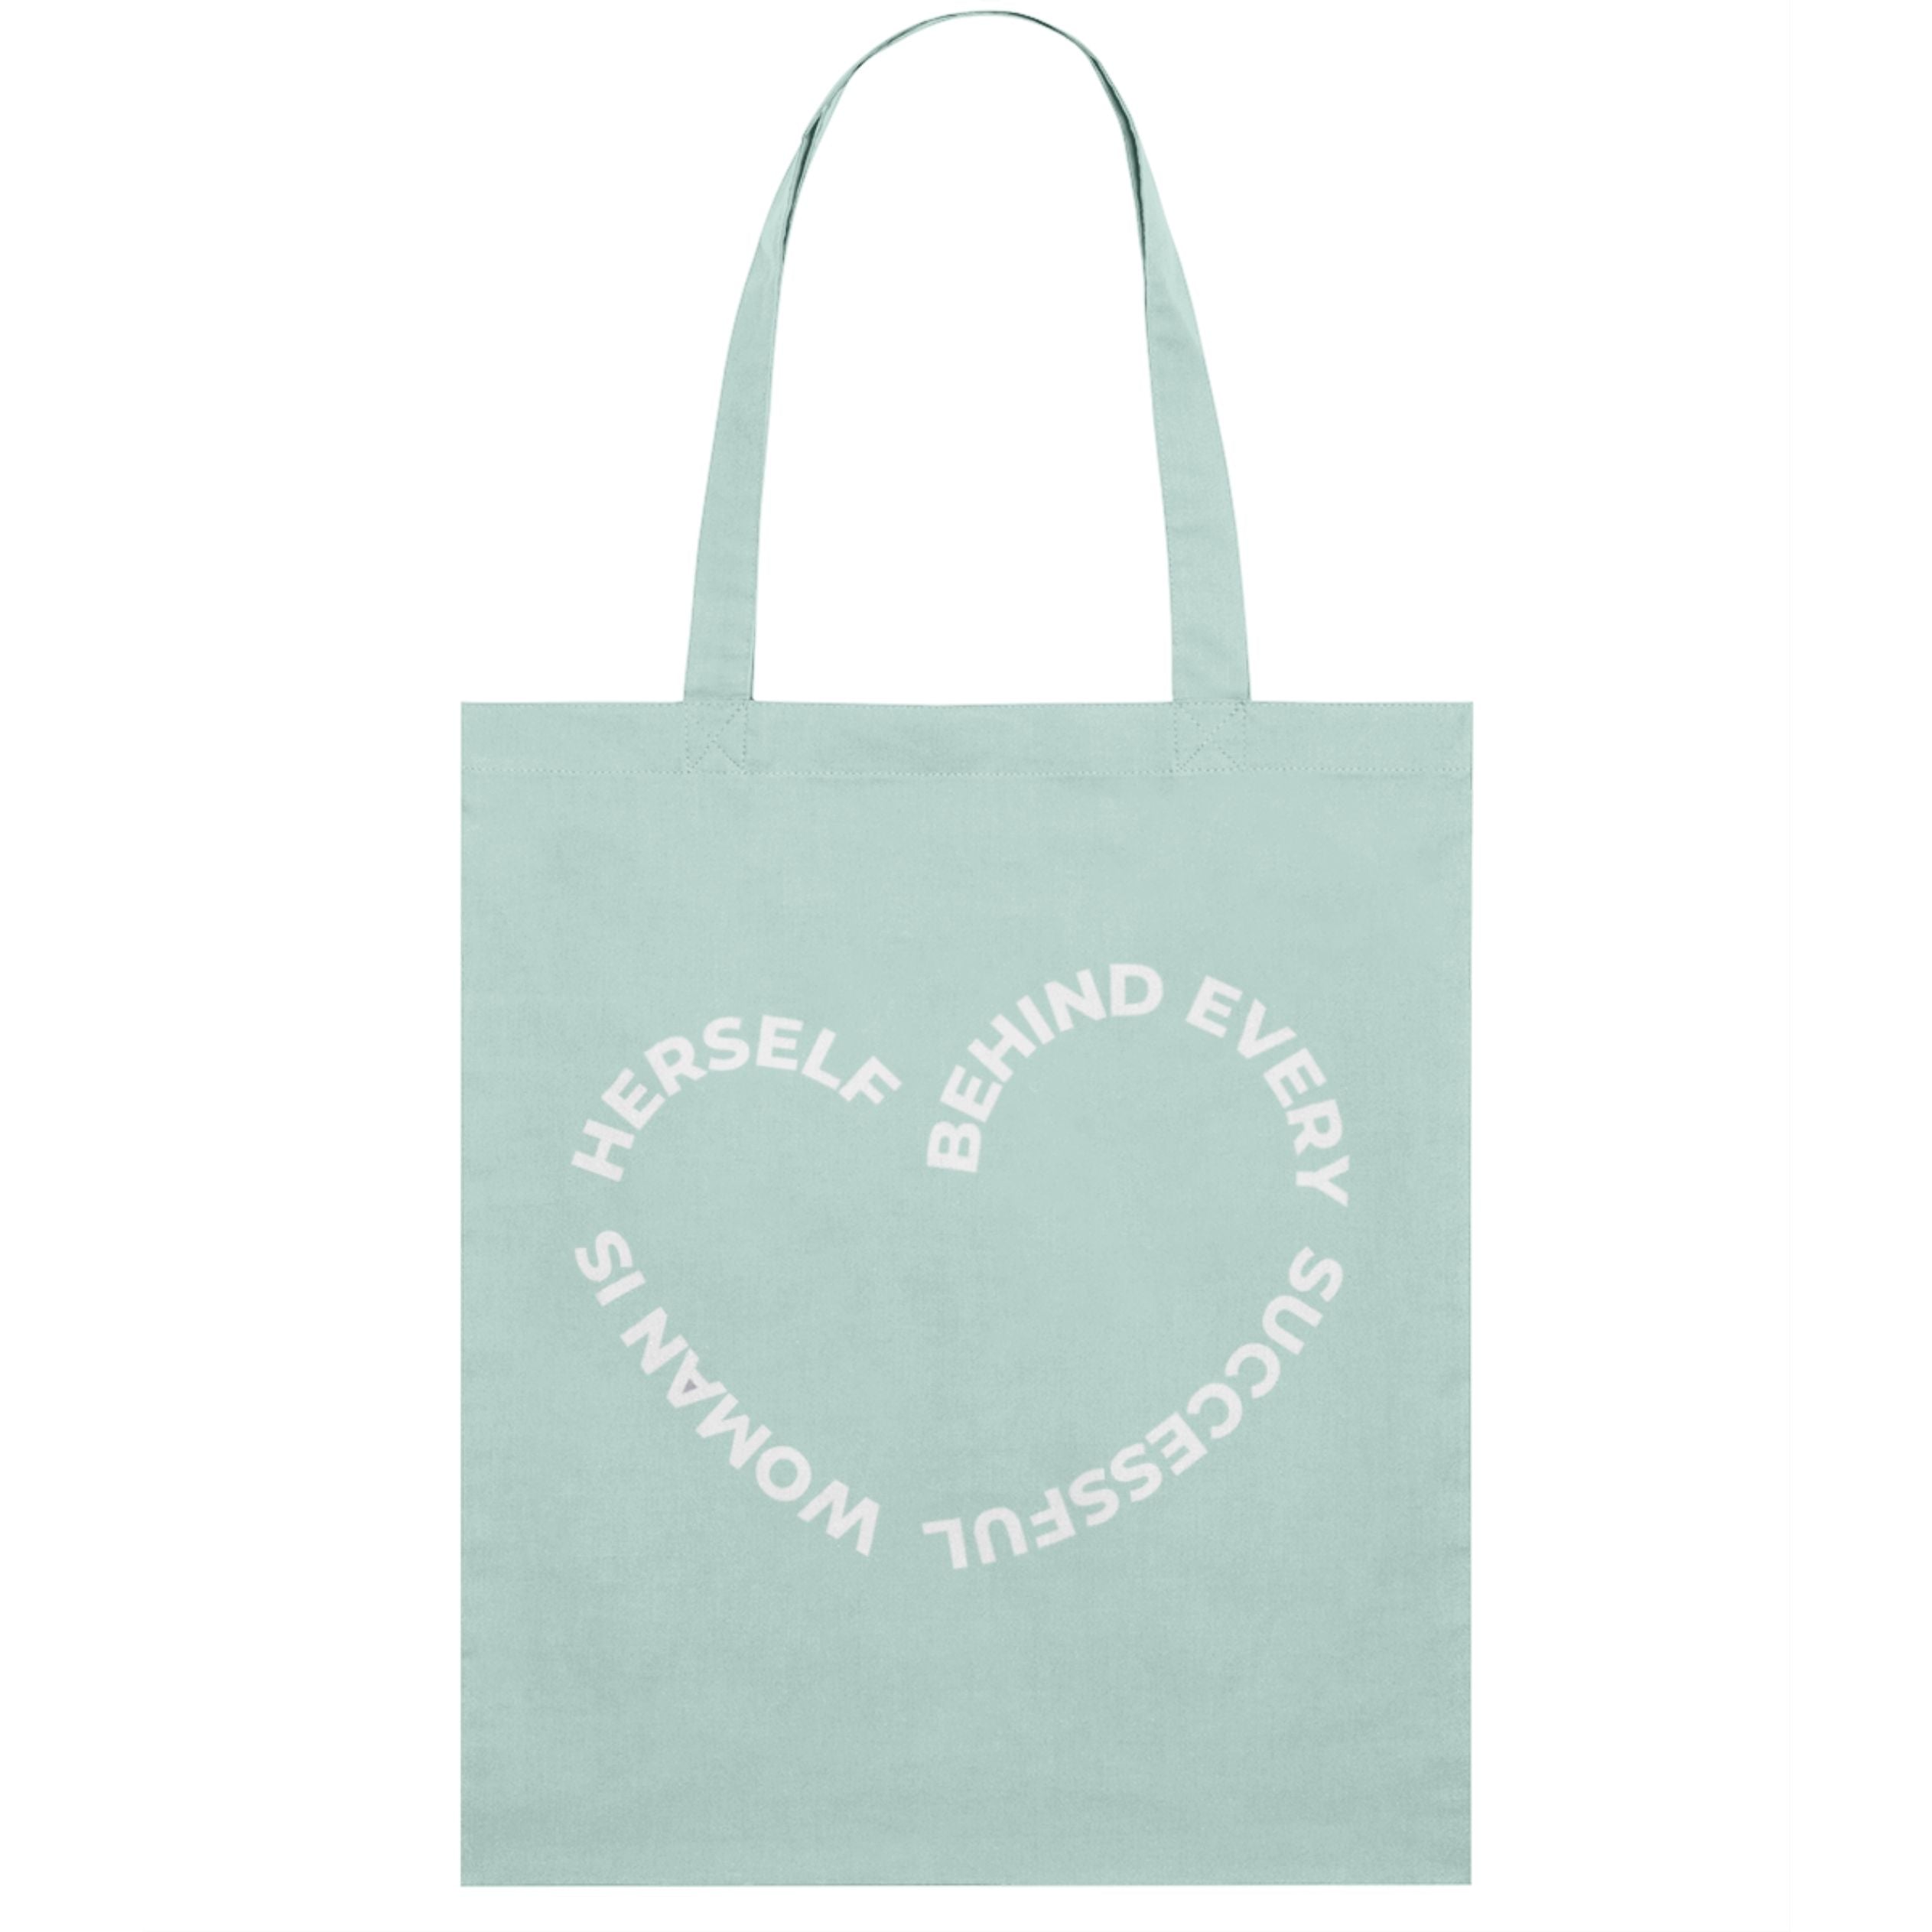 Behind every successful woman is herself tote bag